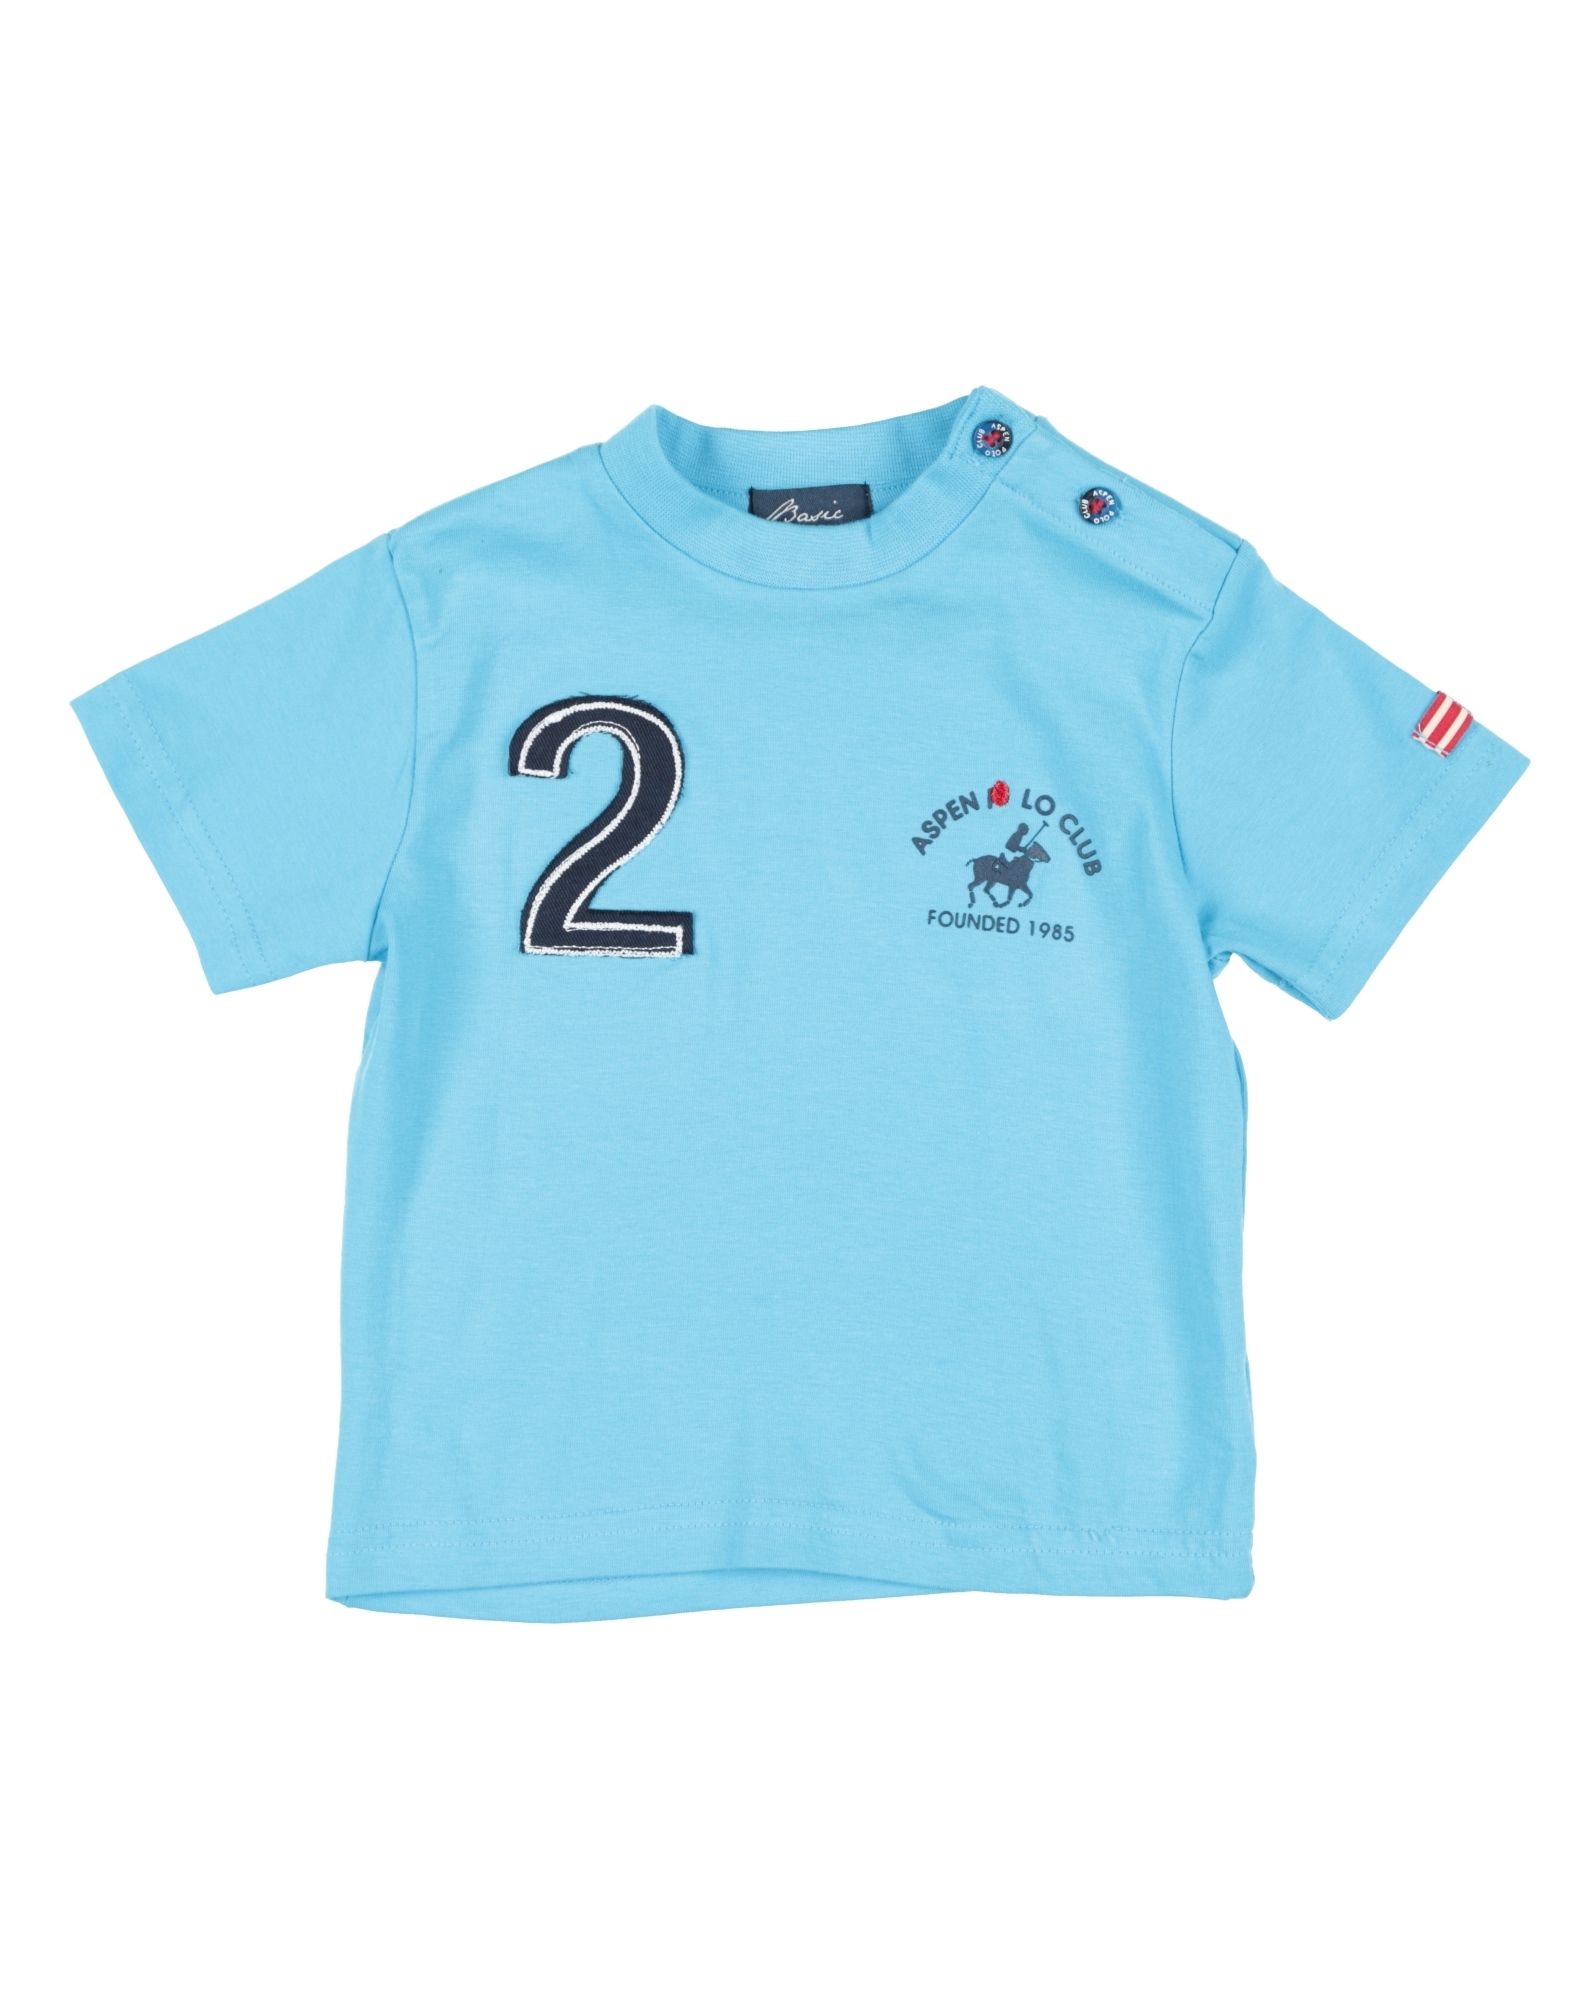 Aspen Polo Club Kids' T-shirts In Turquoise